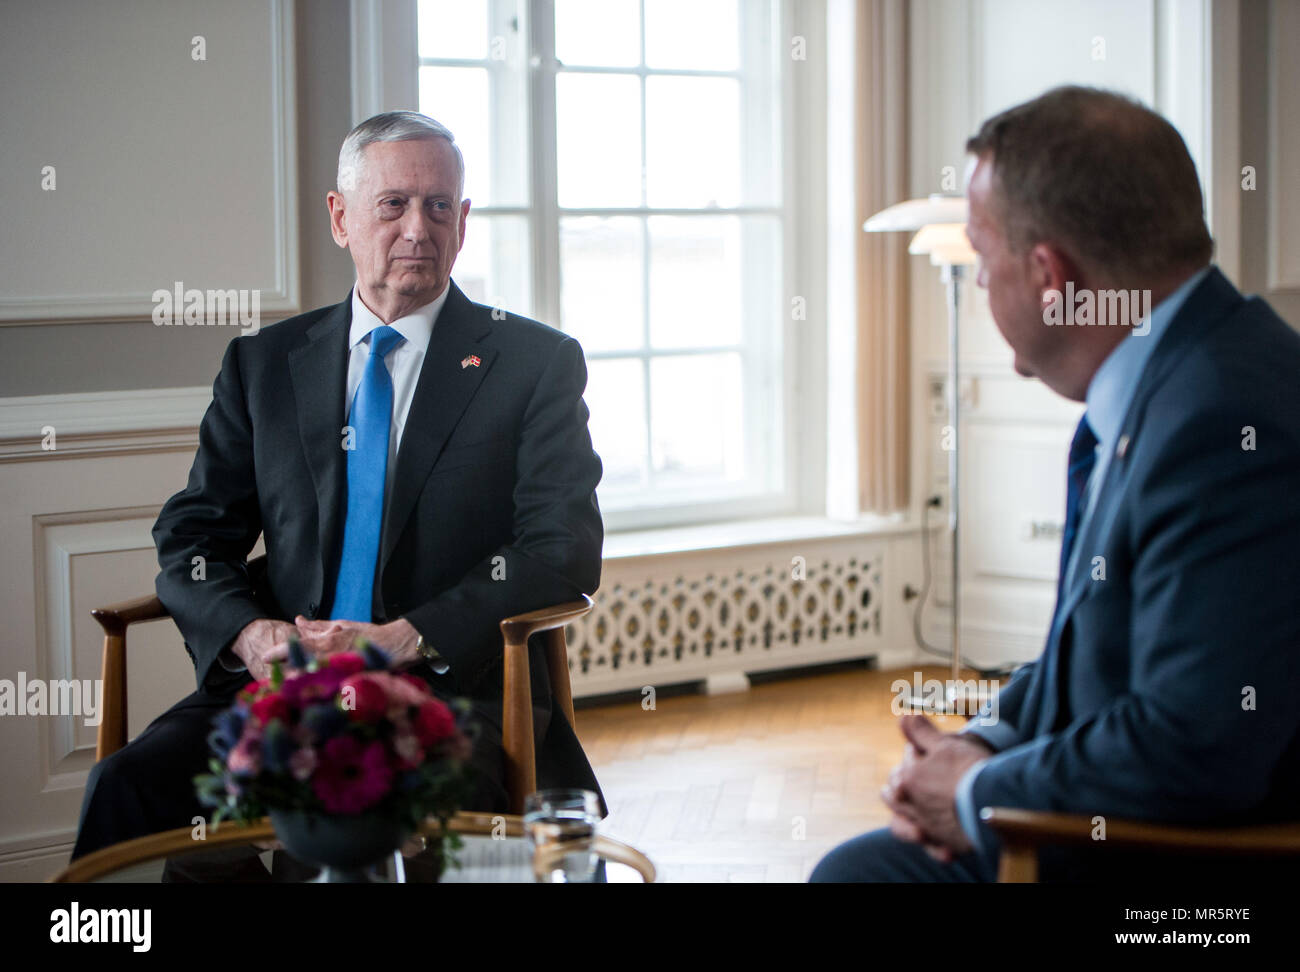 Secretary of Defense Jim Mattis meets with Lars Løkke Rasmussen, the prime minister of Denmark, at the Christiansborg Palace in Copenhagen, Denmark, May 9, 2017. (DOD photo by U.S. Air Force Staff Sgt. Jette Carr) Stock Photo